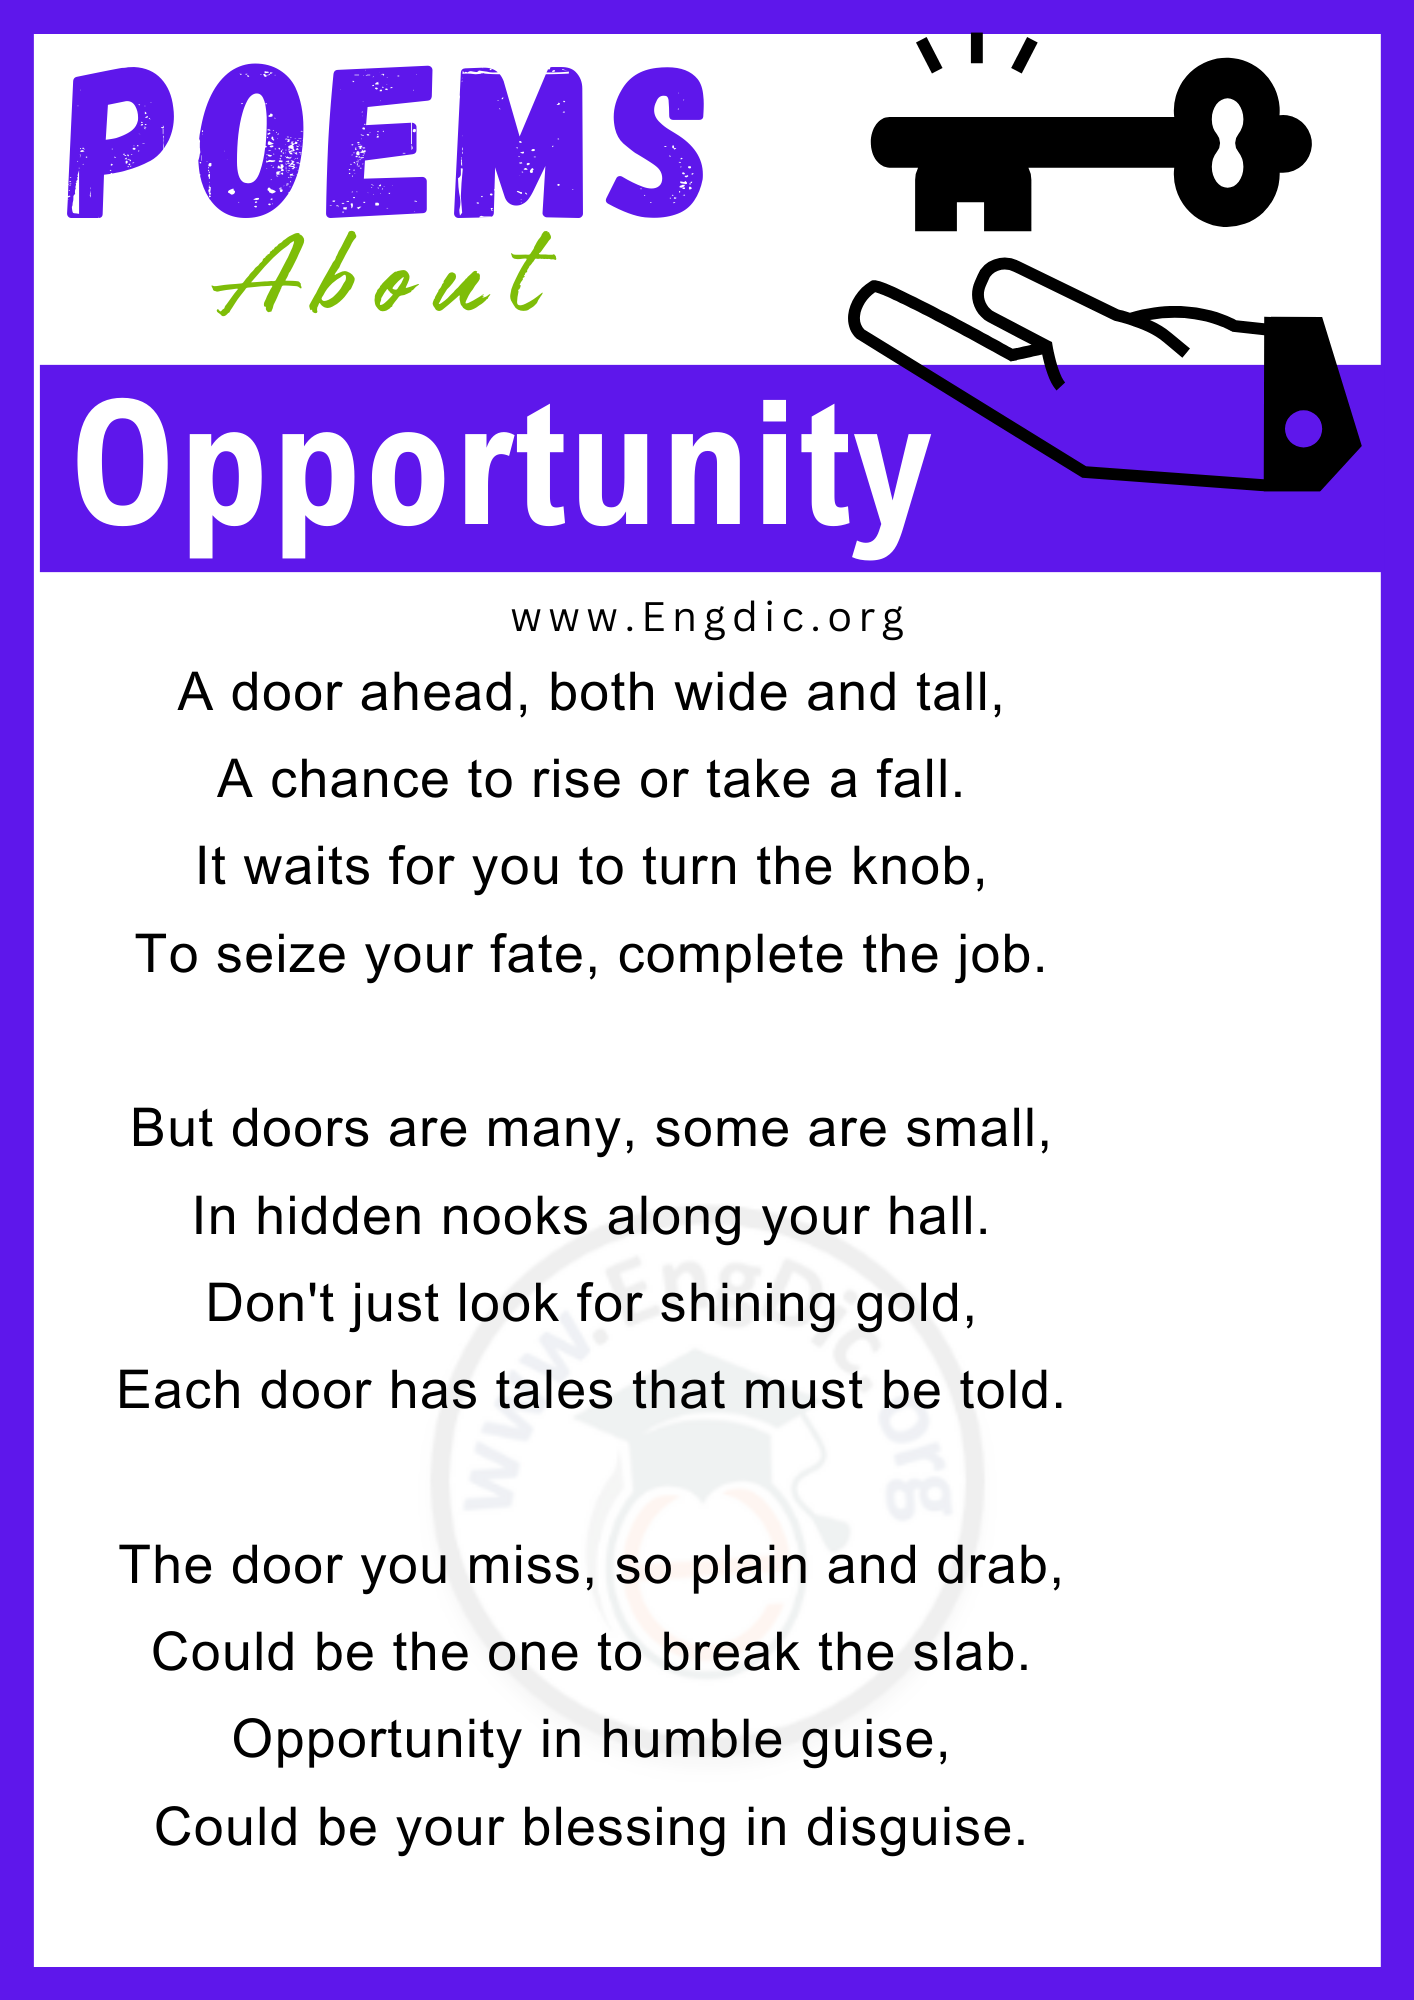 Poems for Opportunity